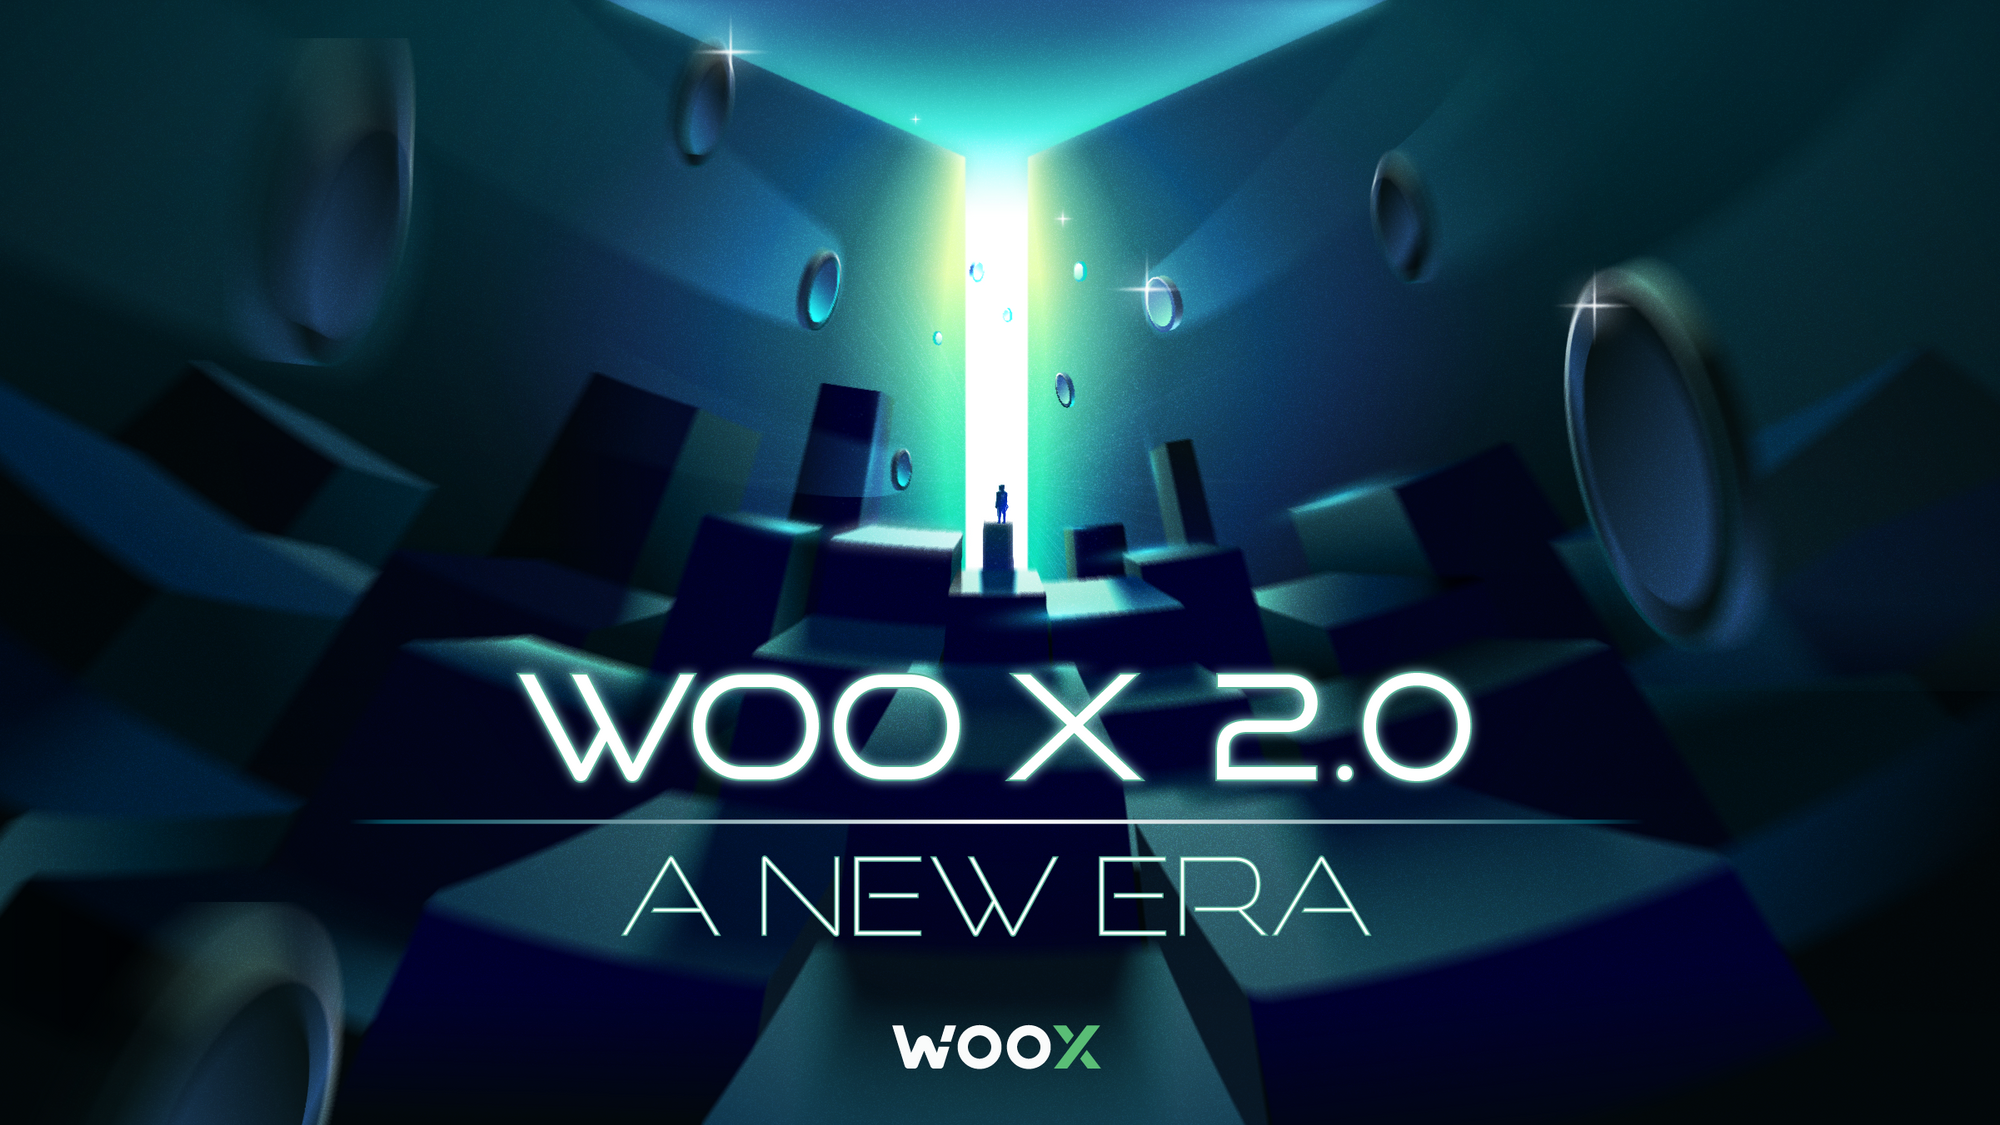 Revamping WOO X business model to enable higher growth trajectory